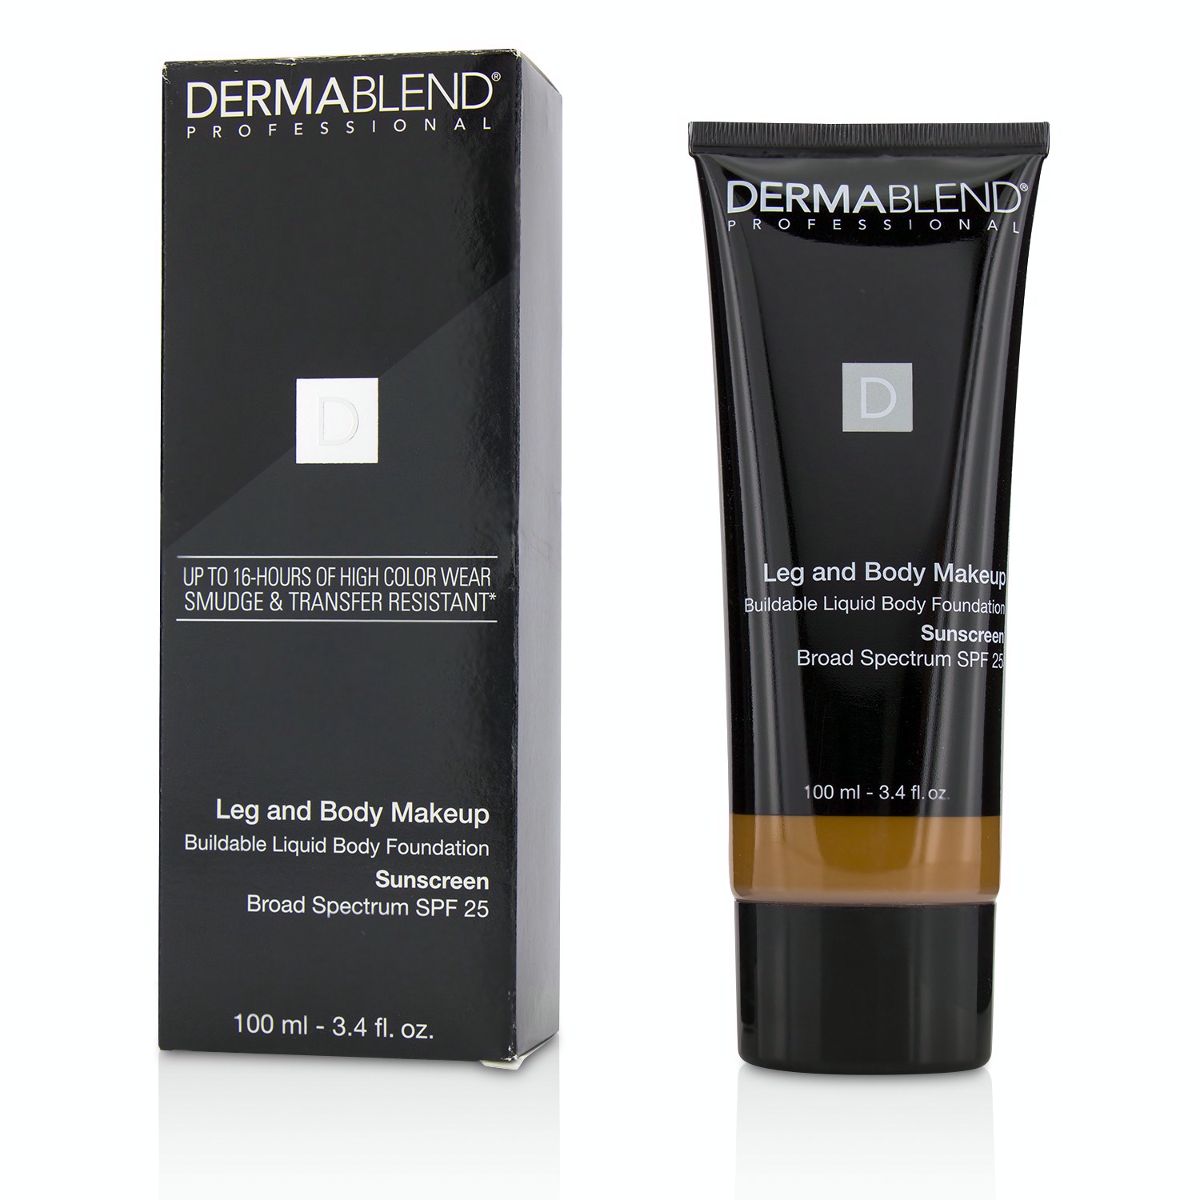 Leg and Body Make Up Buildable Liquid Body Foundation Sunscreen Broad Spectrum SPF 25 - #Deep Golden 70W Dermablend Image